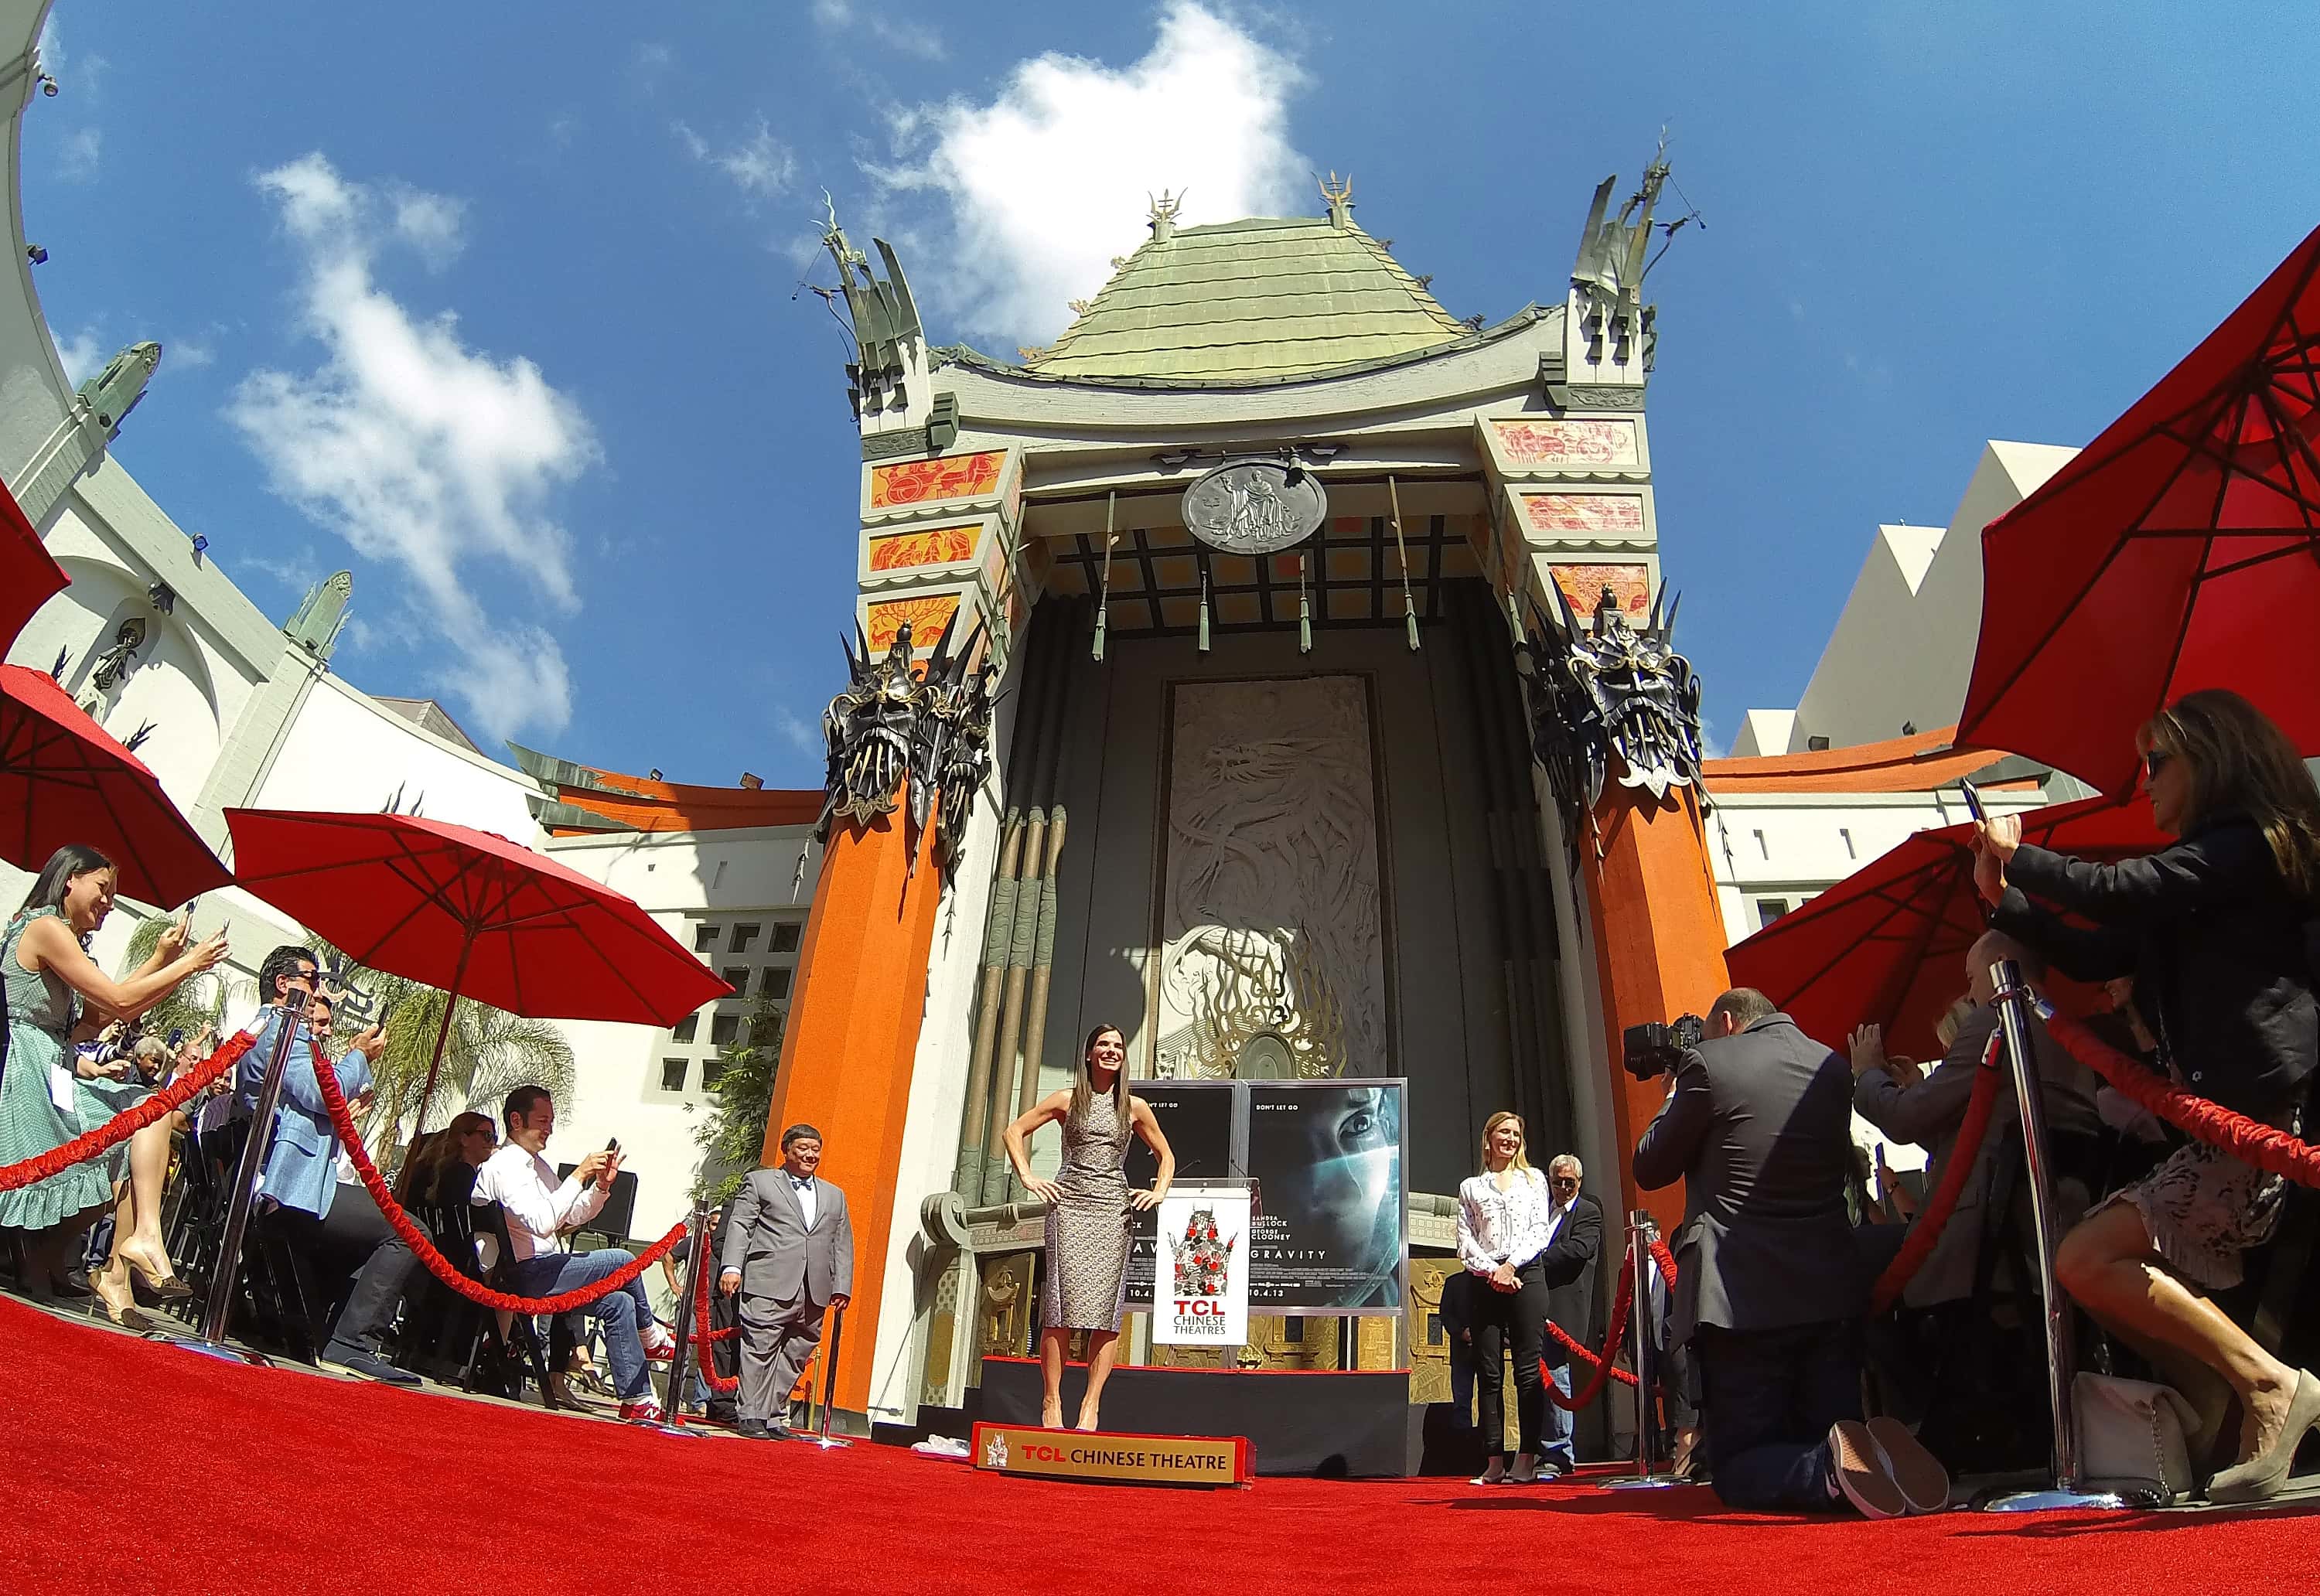 Sandra Bullock Immortalized With Hand And Footprint Ceremony At The TCL Chinese Theatre In Celebration Of Her New Film 'Gravity'